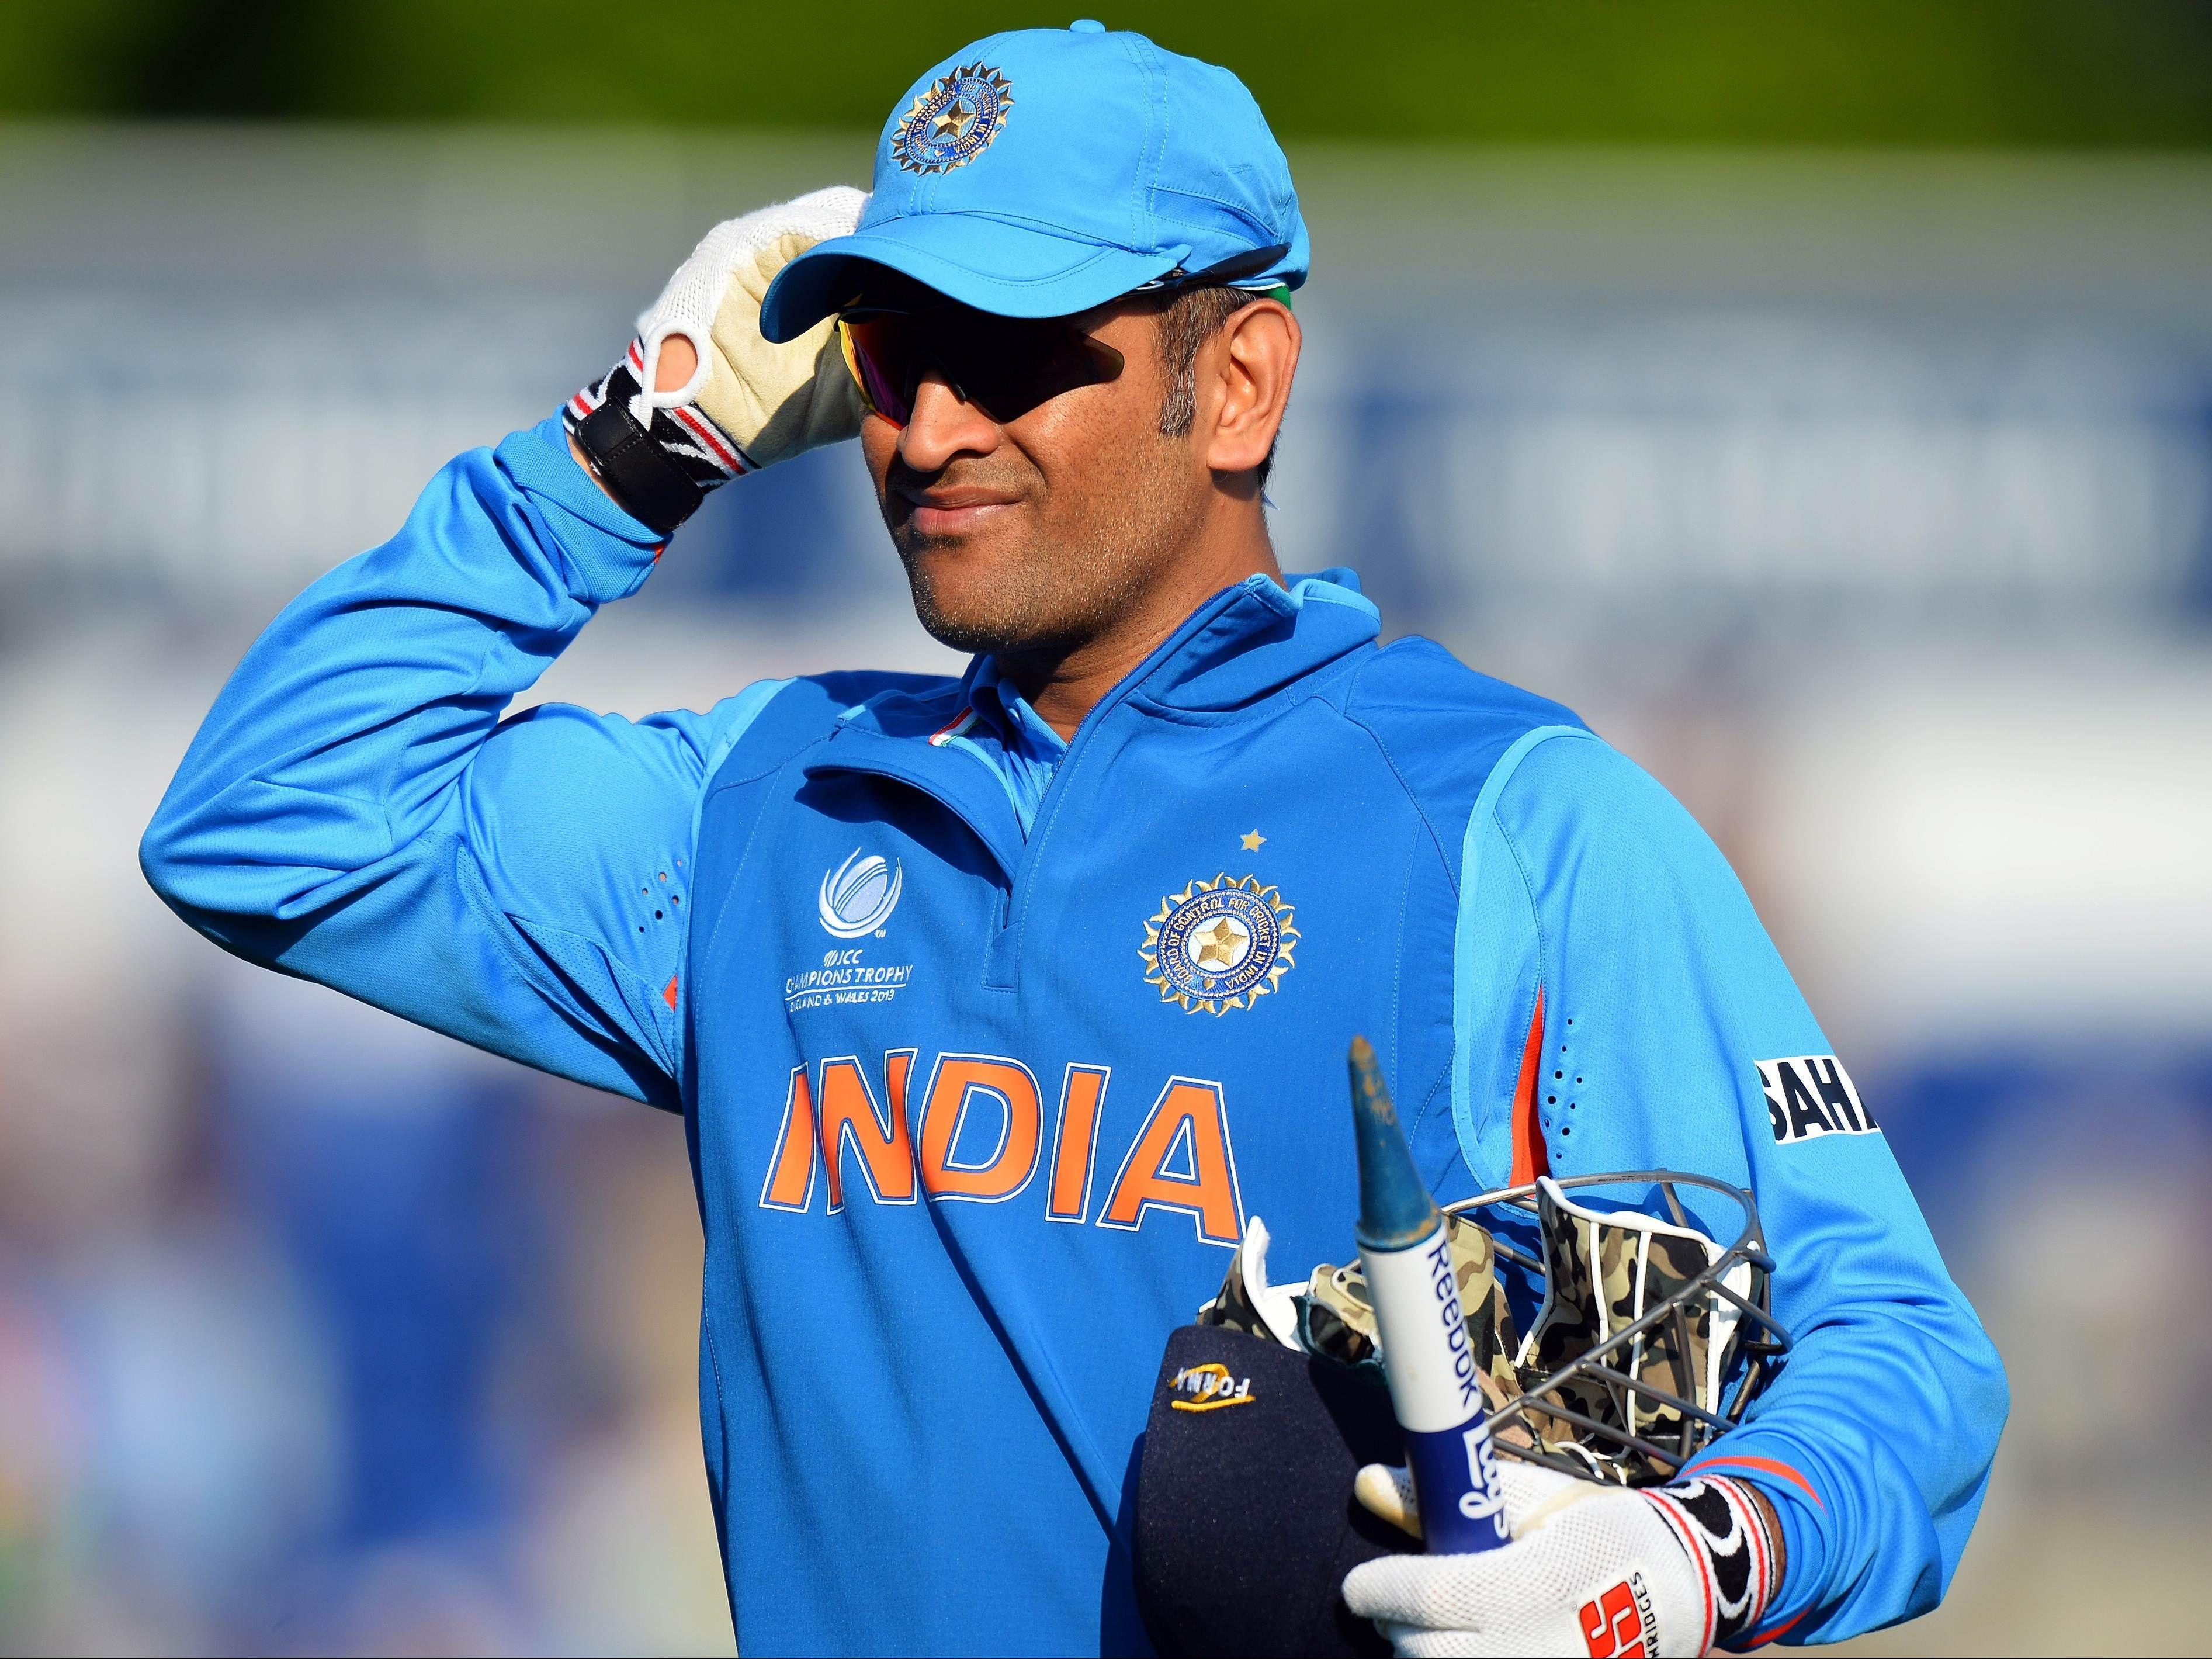 Dhoni Wallpaper High Resolution and Quality Download